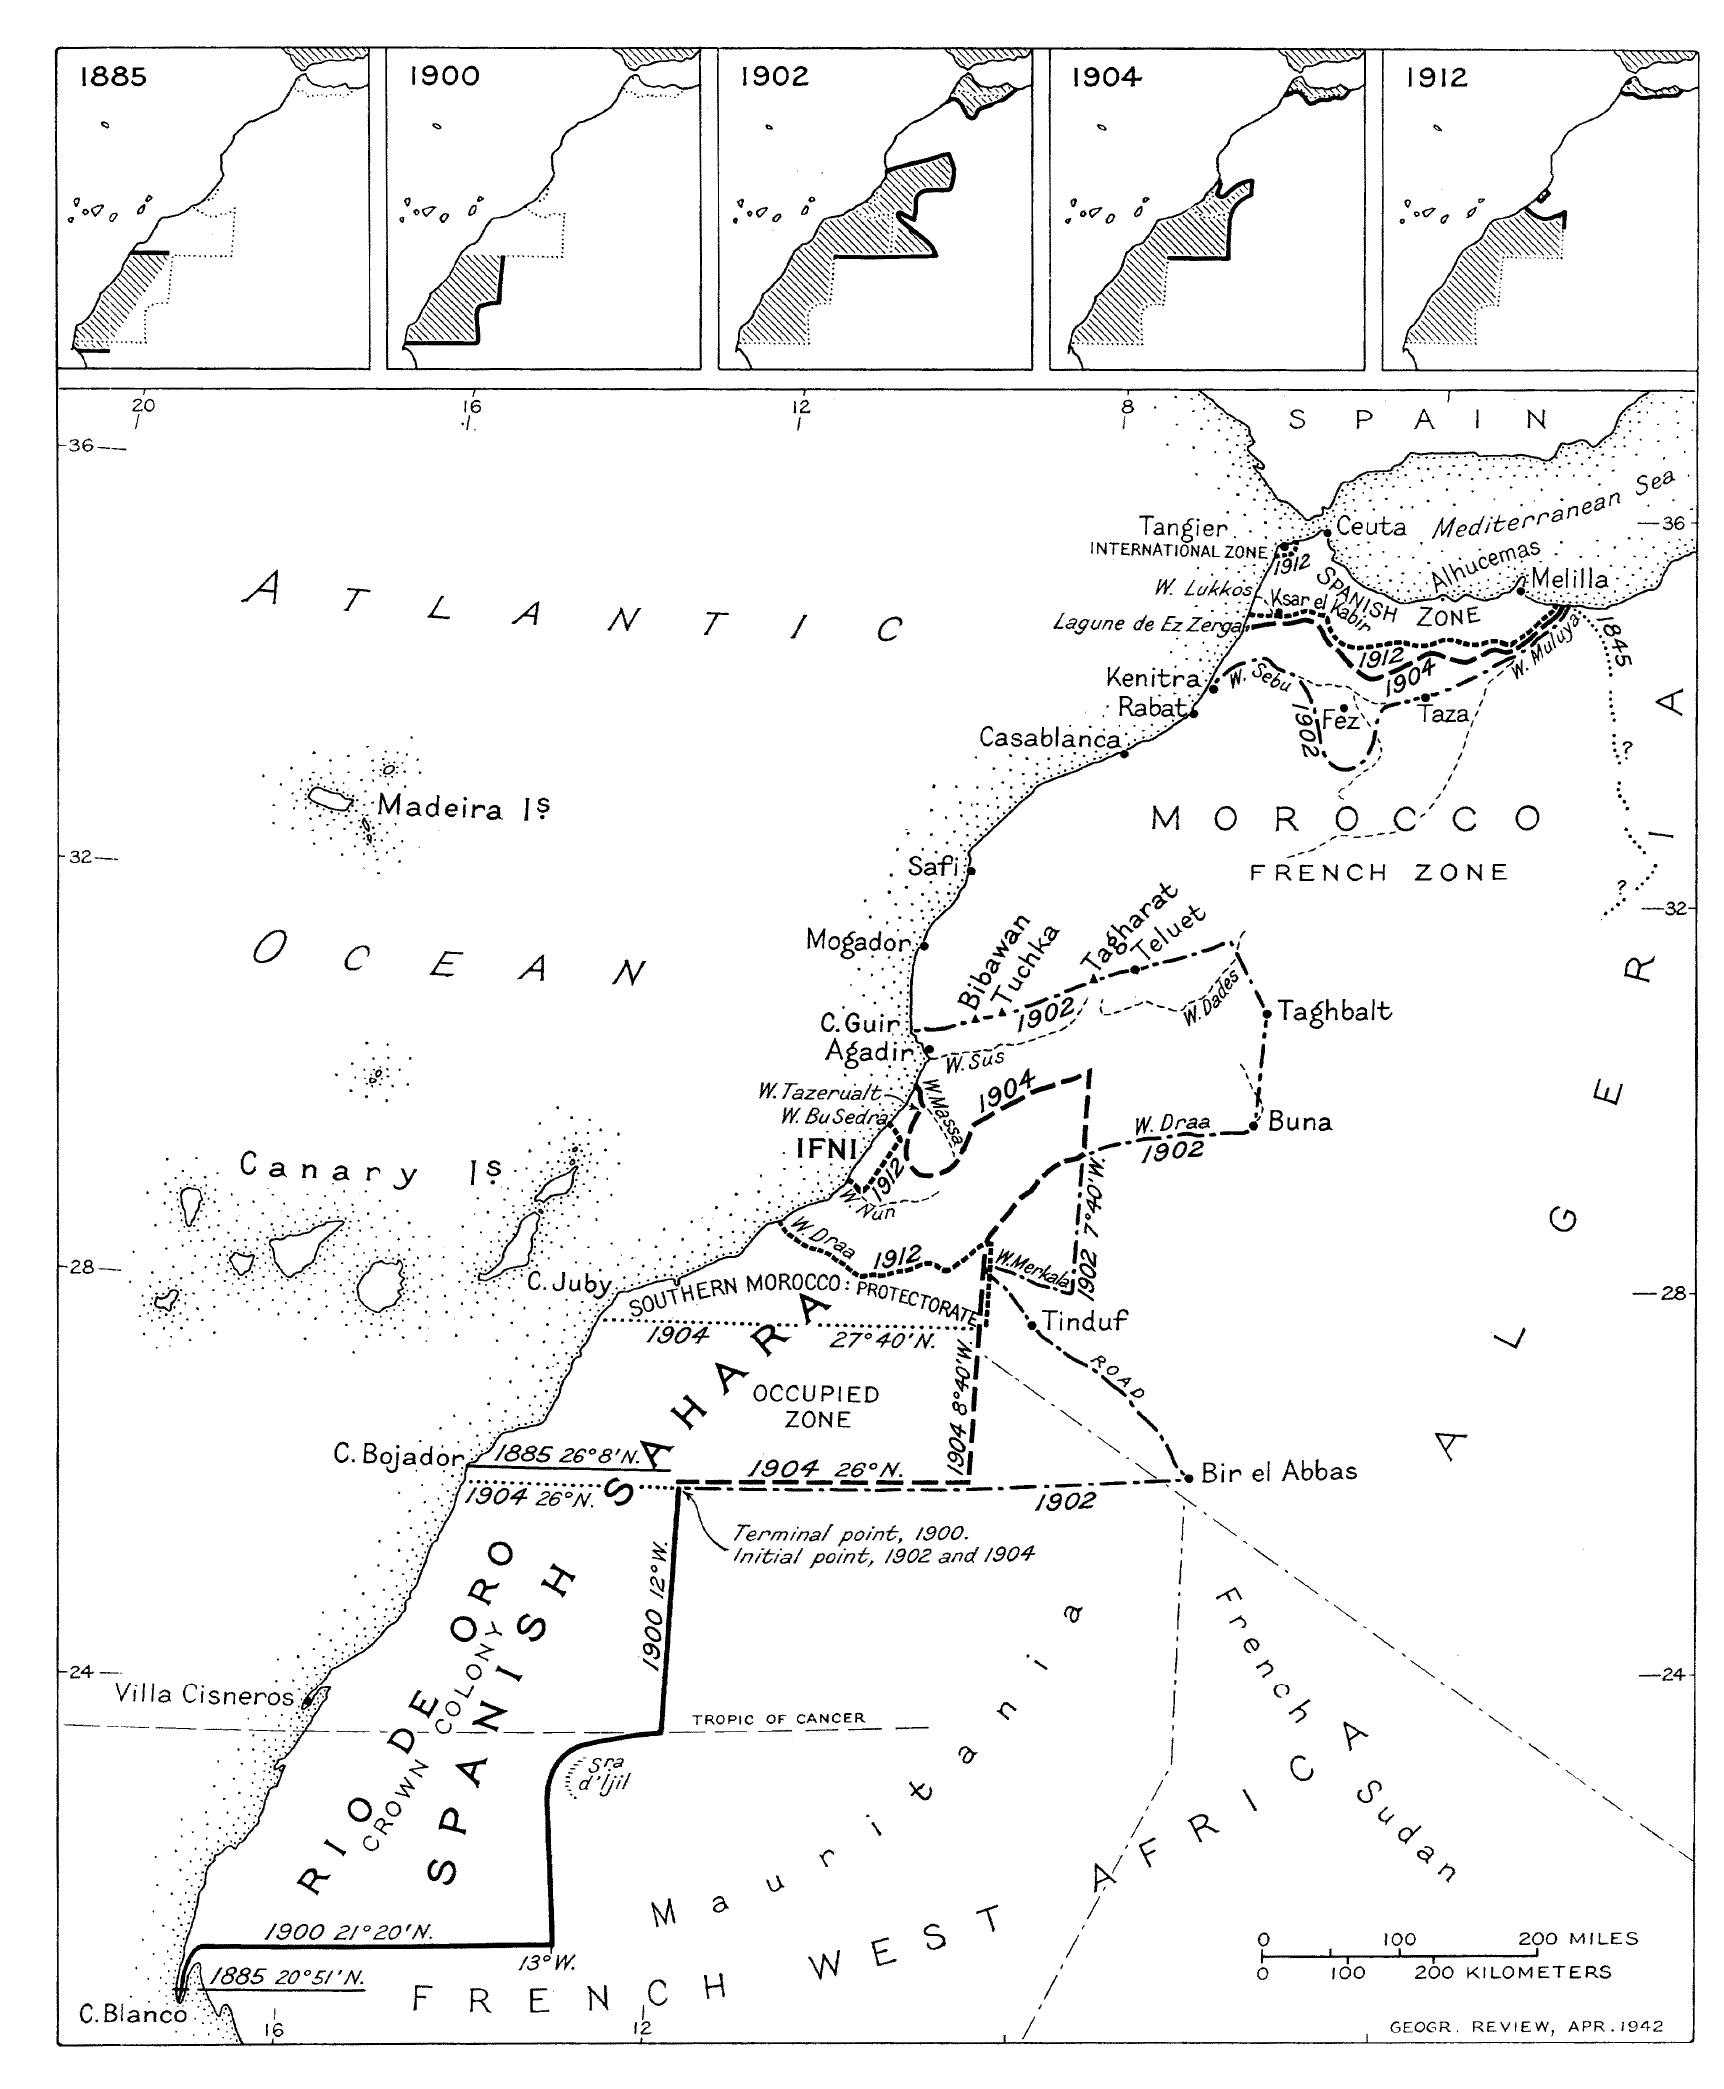 spanish_territorial_boundary_changes_in_northwest_africa_1885-1912.png